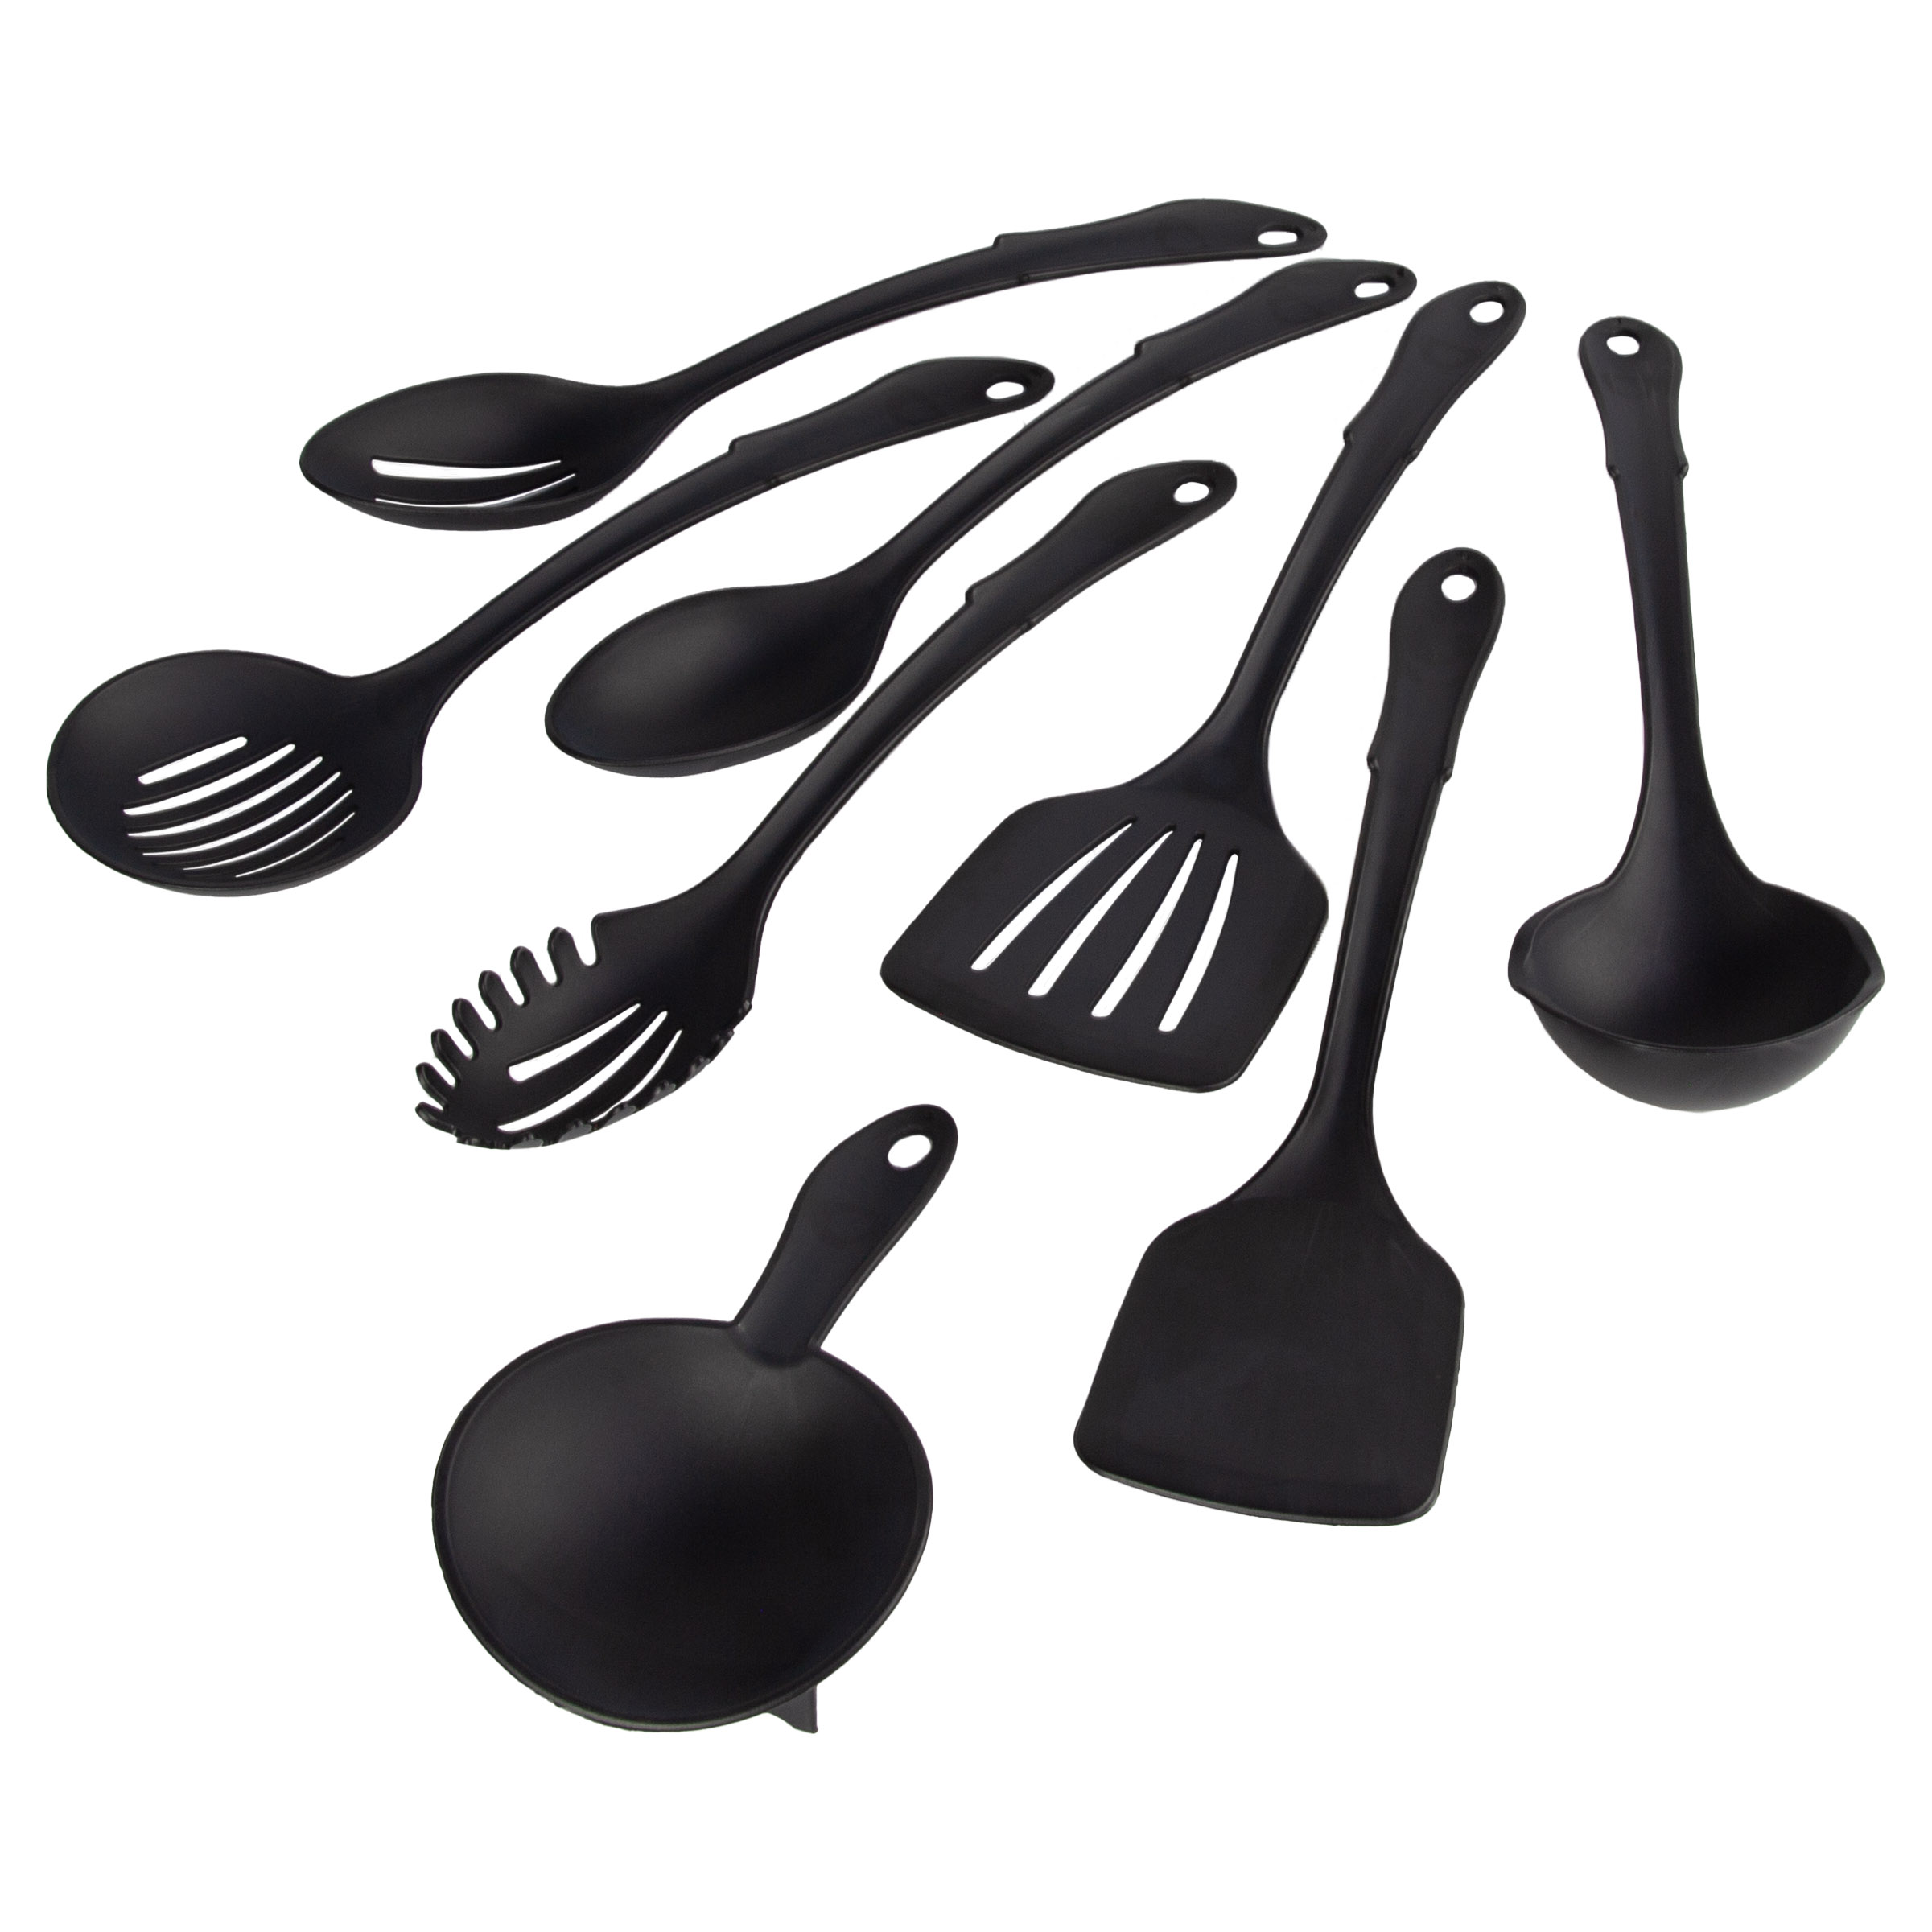 Mainstays 8-Piece Nylon Kitchen Utensil Set with Connector Ring, Black Plastic - image 1 of 20